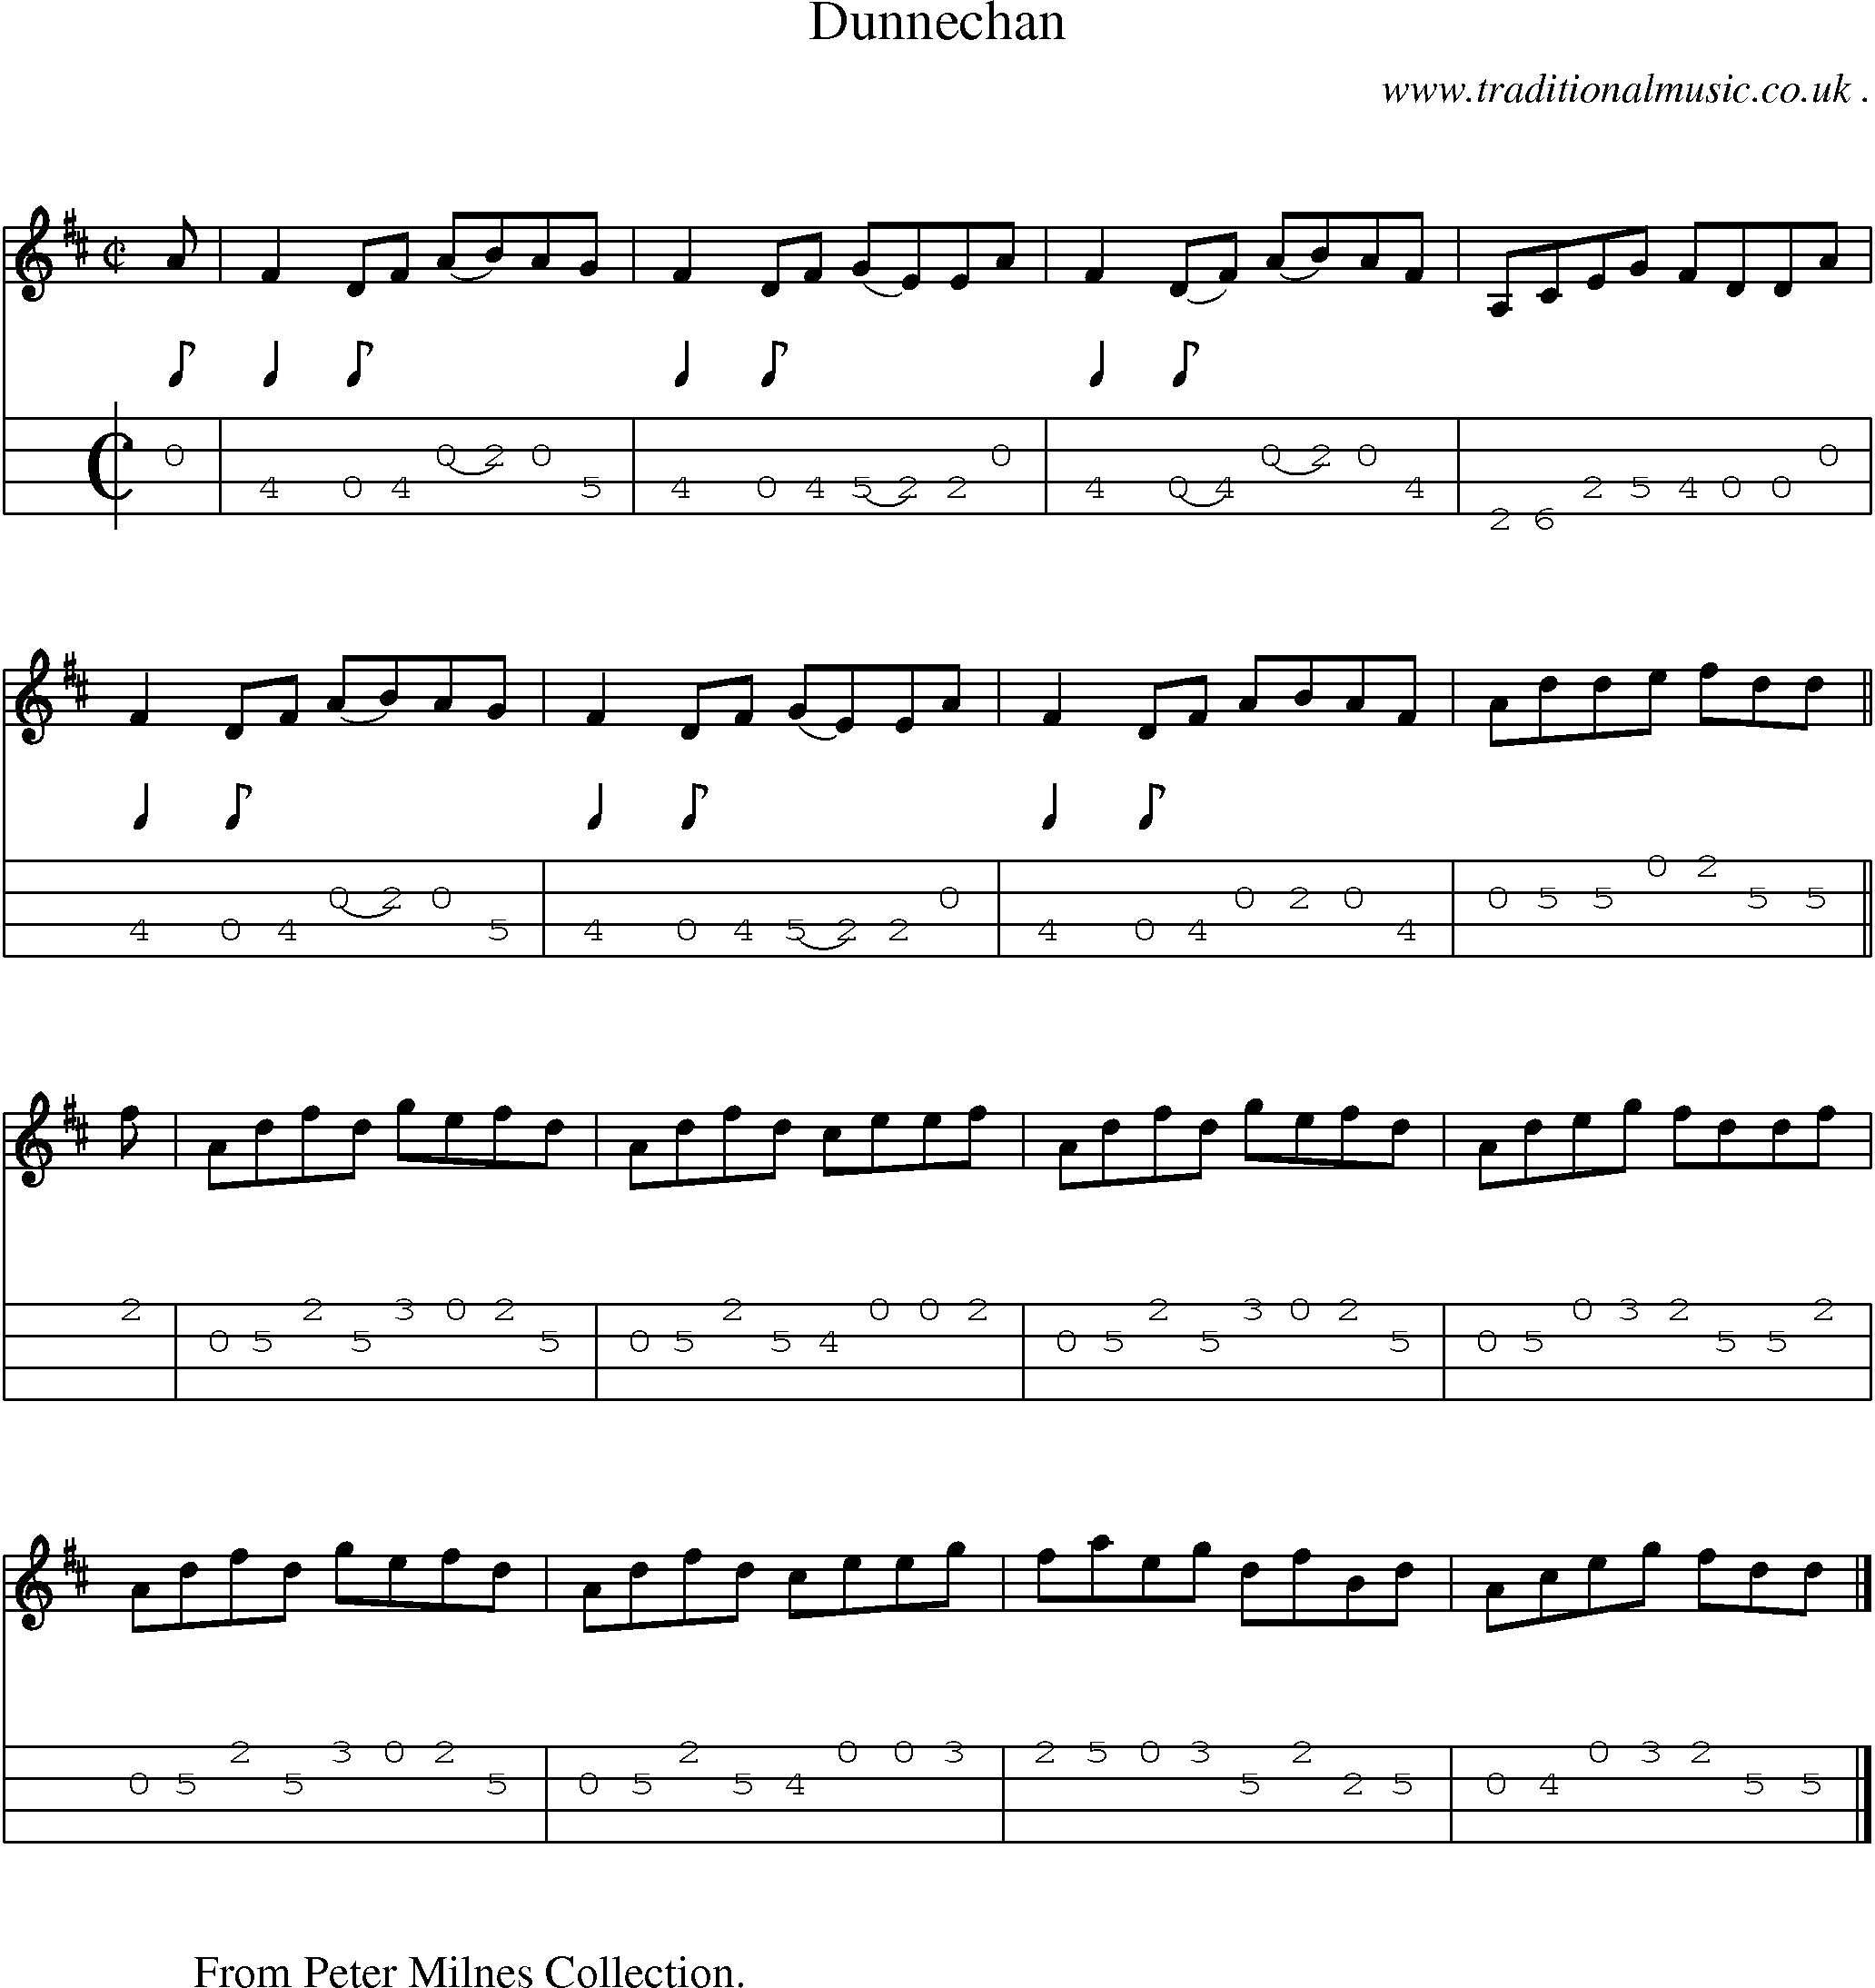 Sheet-music  score, Chords and Mandolin Tabs for Dunnechan